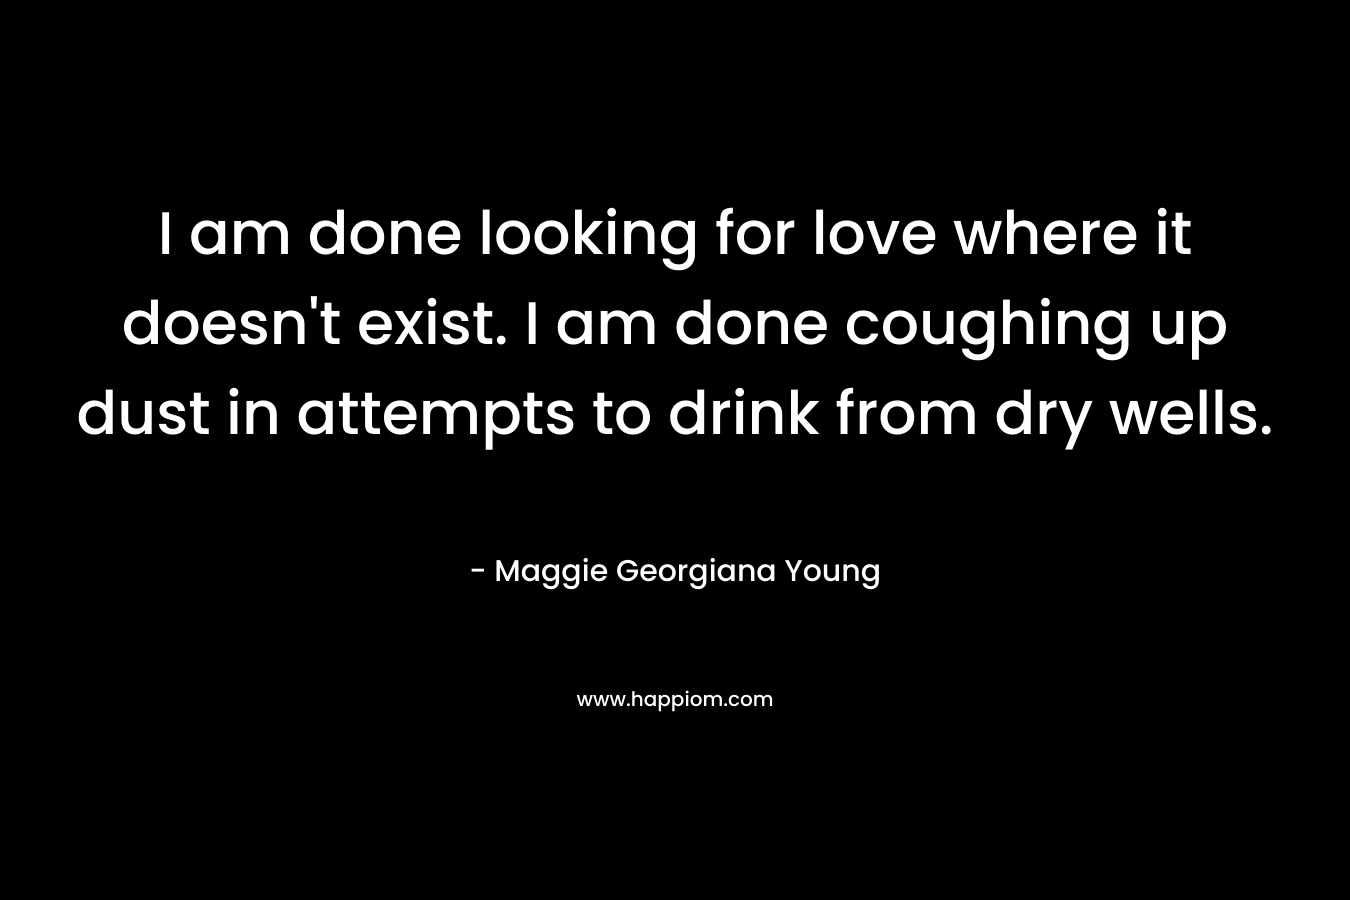 I am done looking for love where it doesn’t exist. I am done coughing up dust in attempts to drink from dry wells. – Maggie Georgiana Young